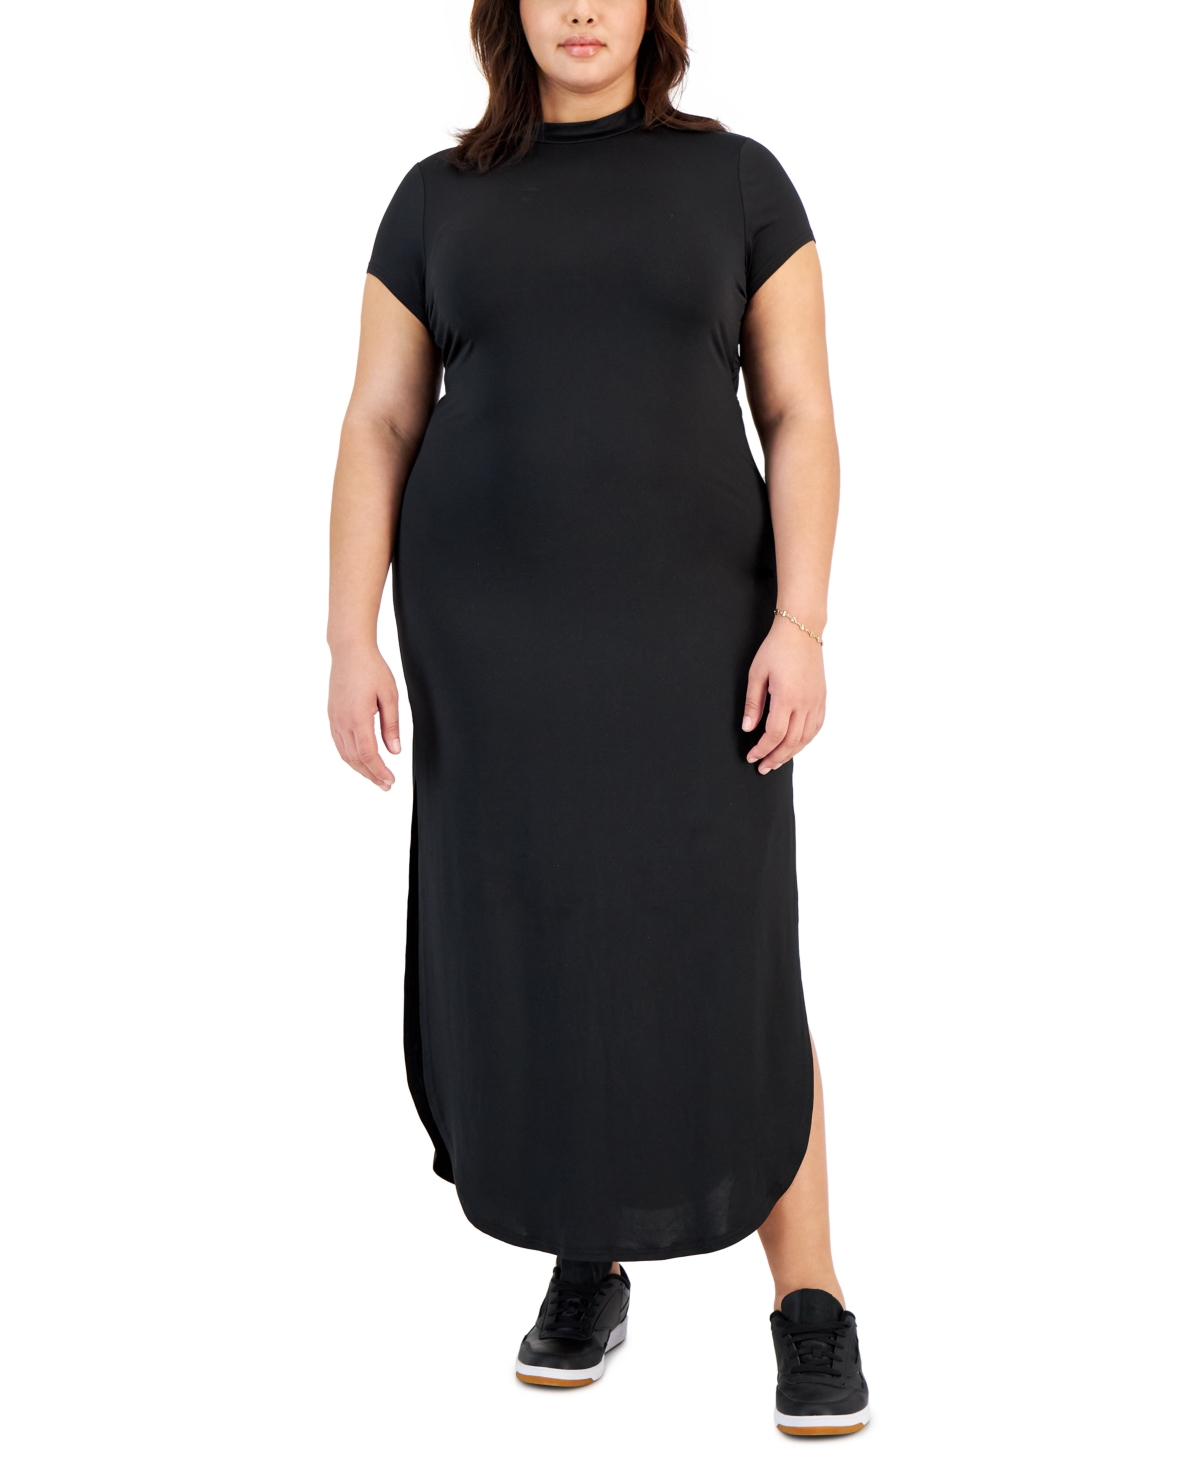 Full Circle Trends Trendy Plus Size Back-cutout Maxi Dress In Black Beuaty